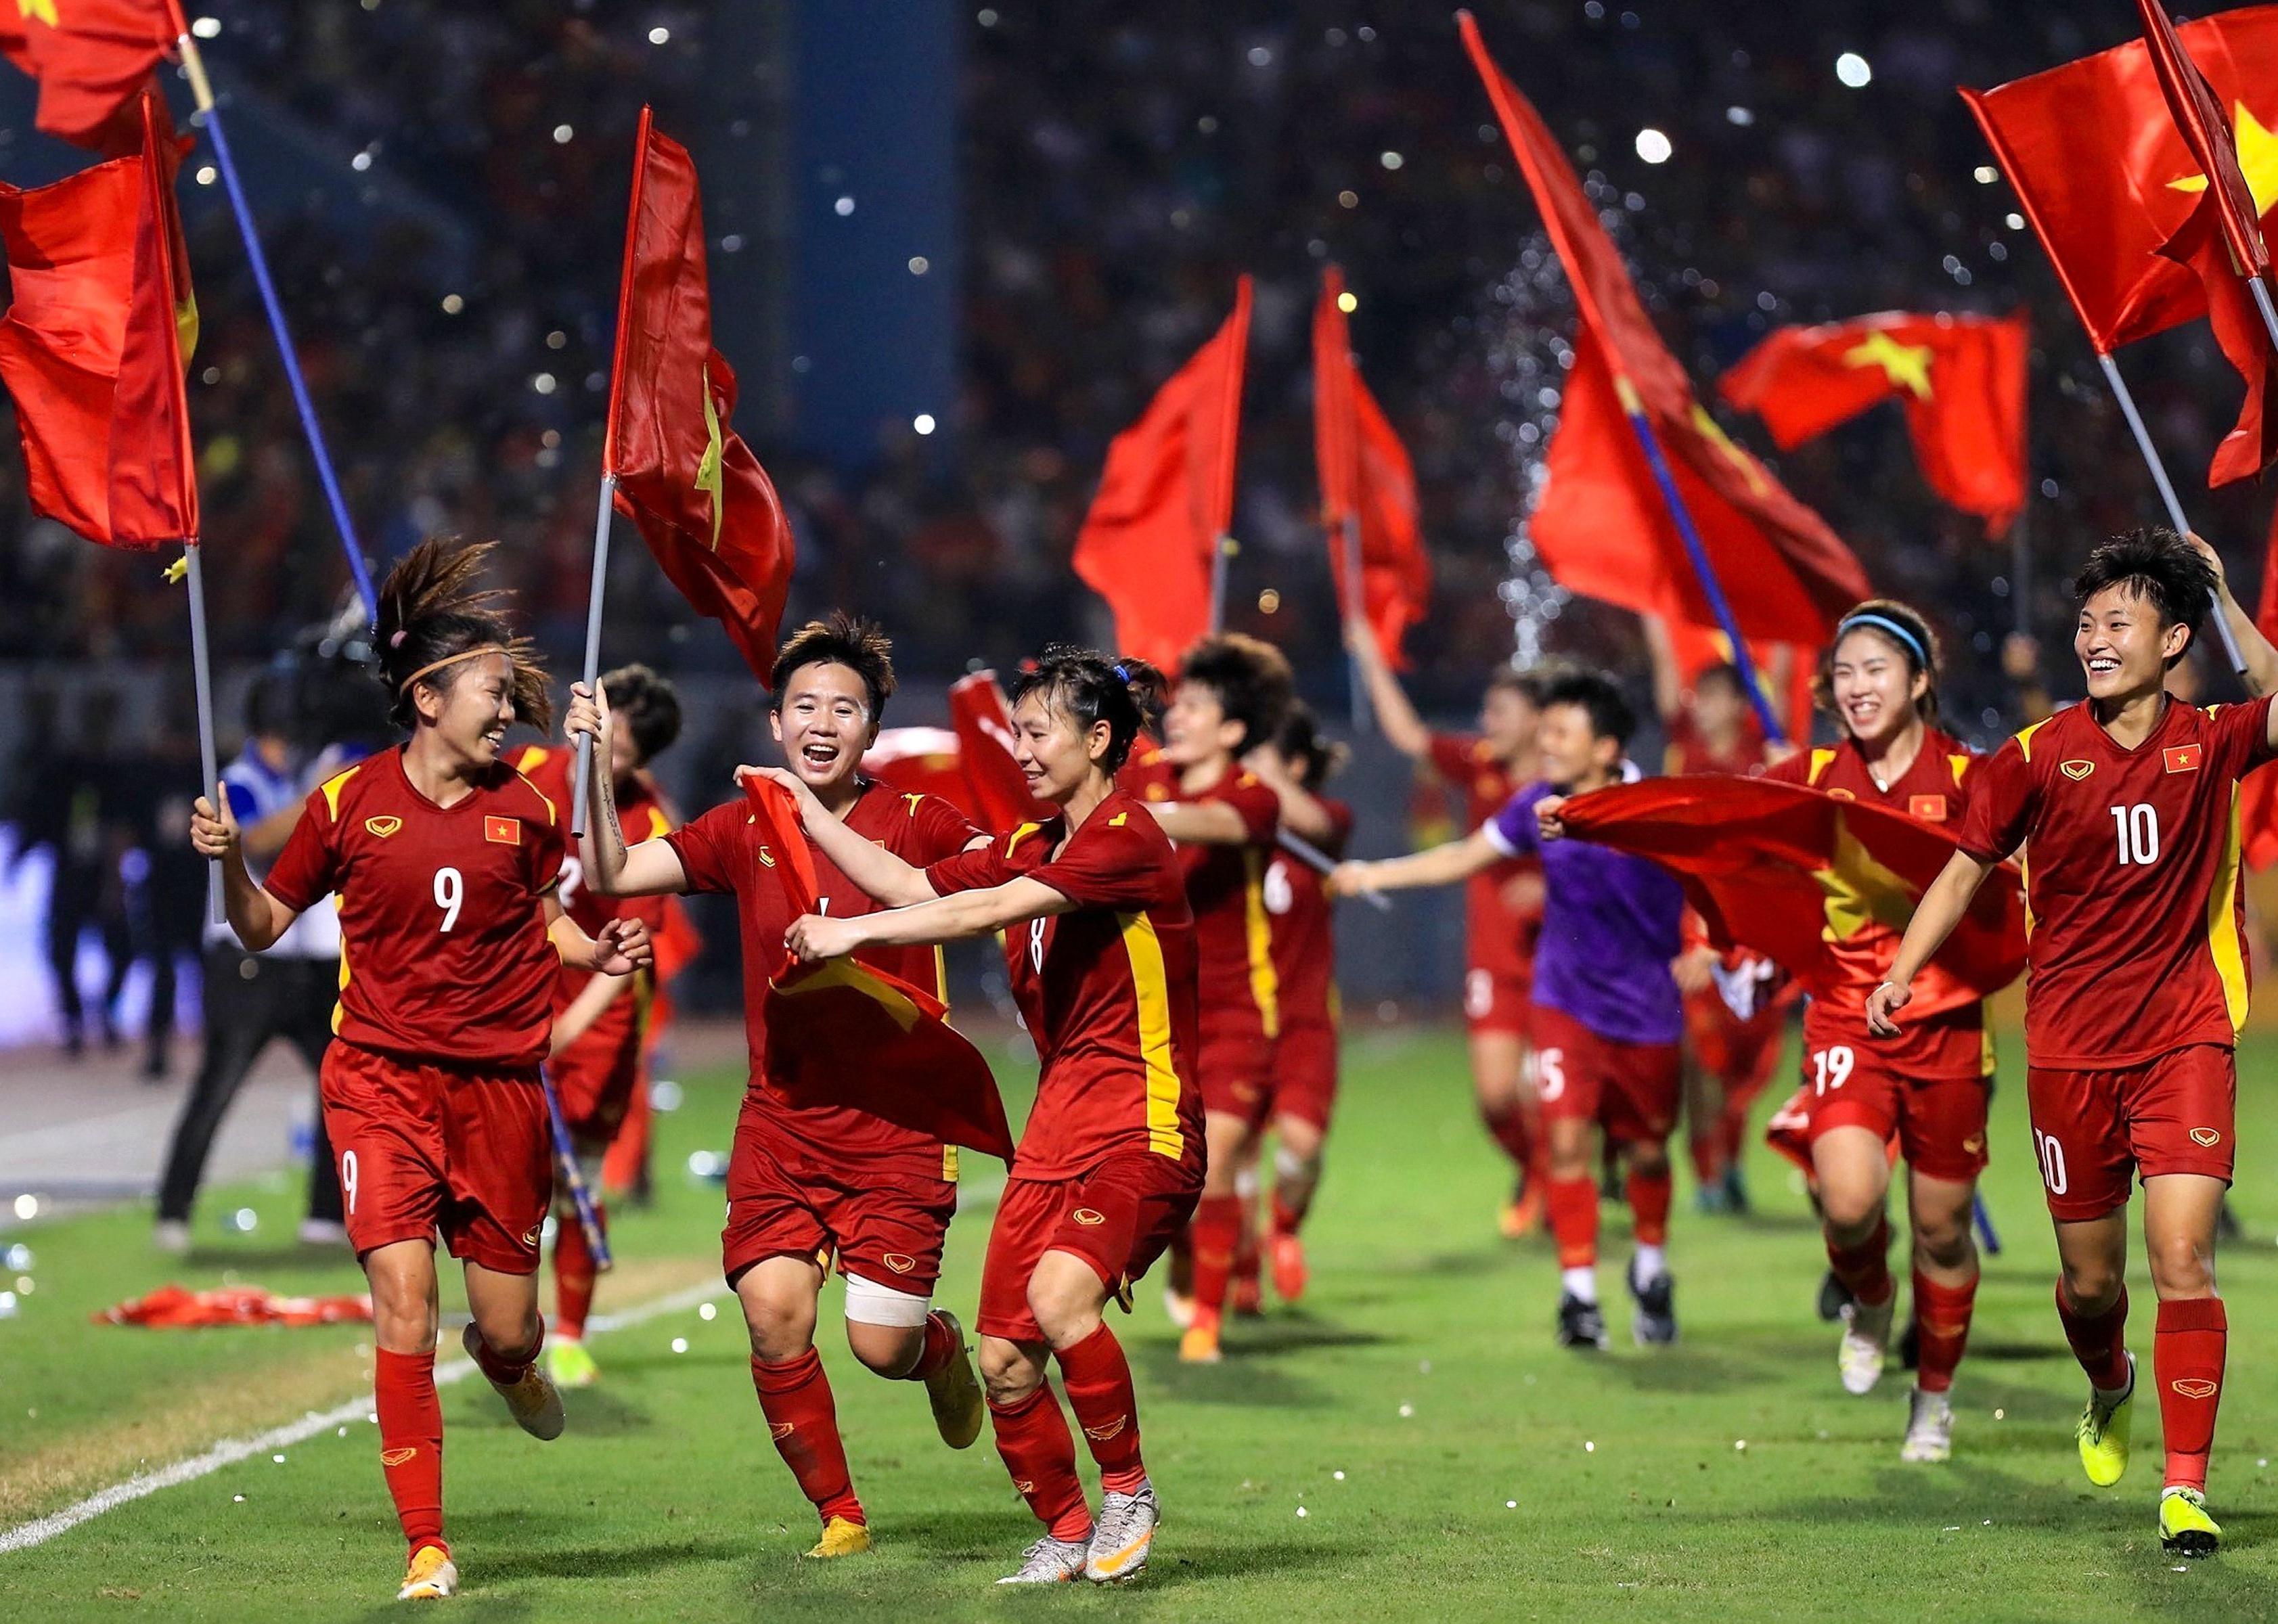 Vietnam's players celebrating after beating Thailand in the women's football final match.